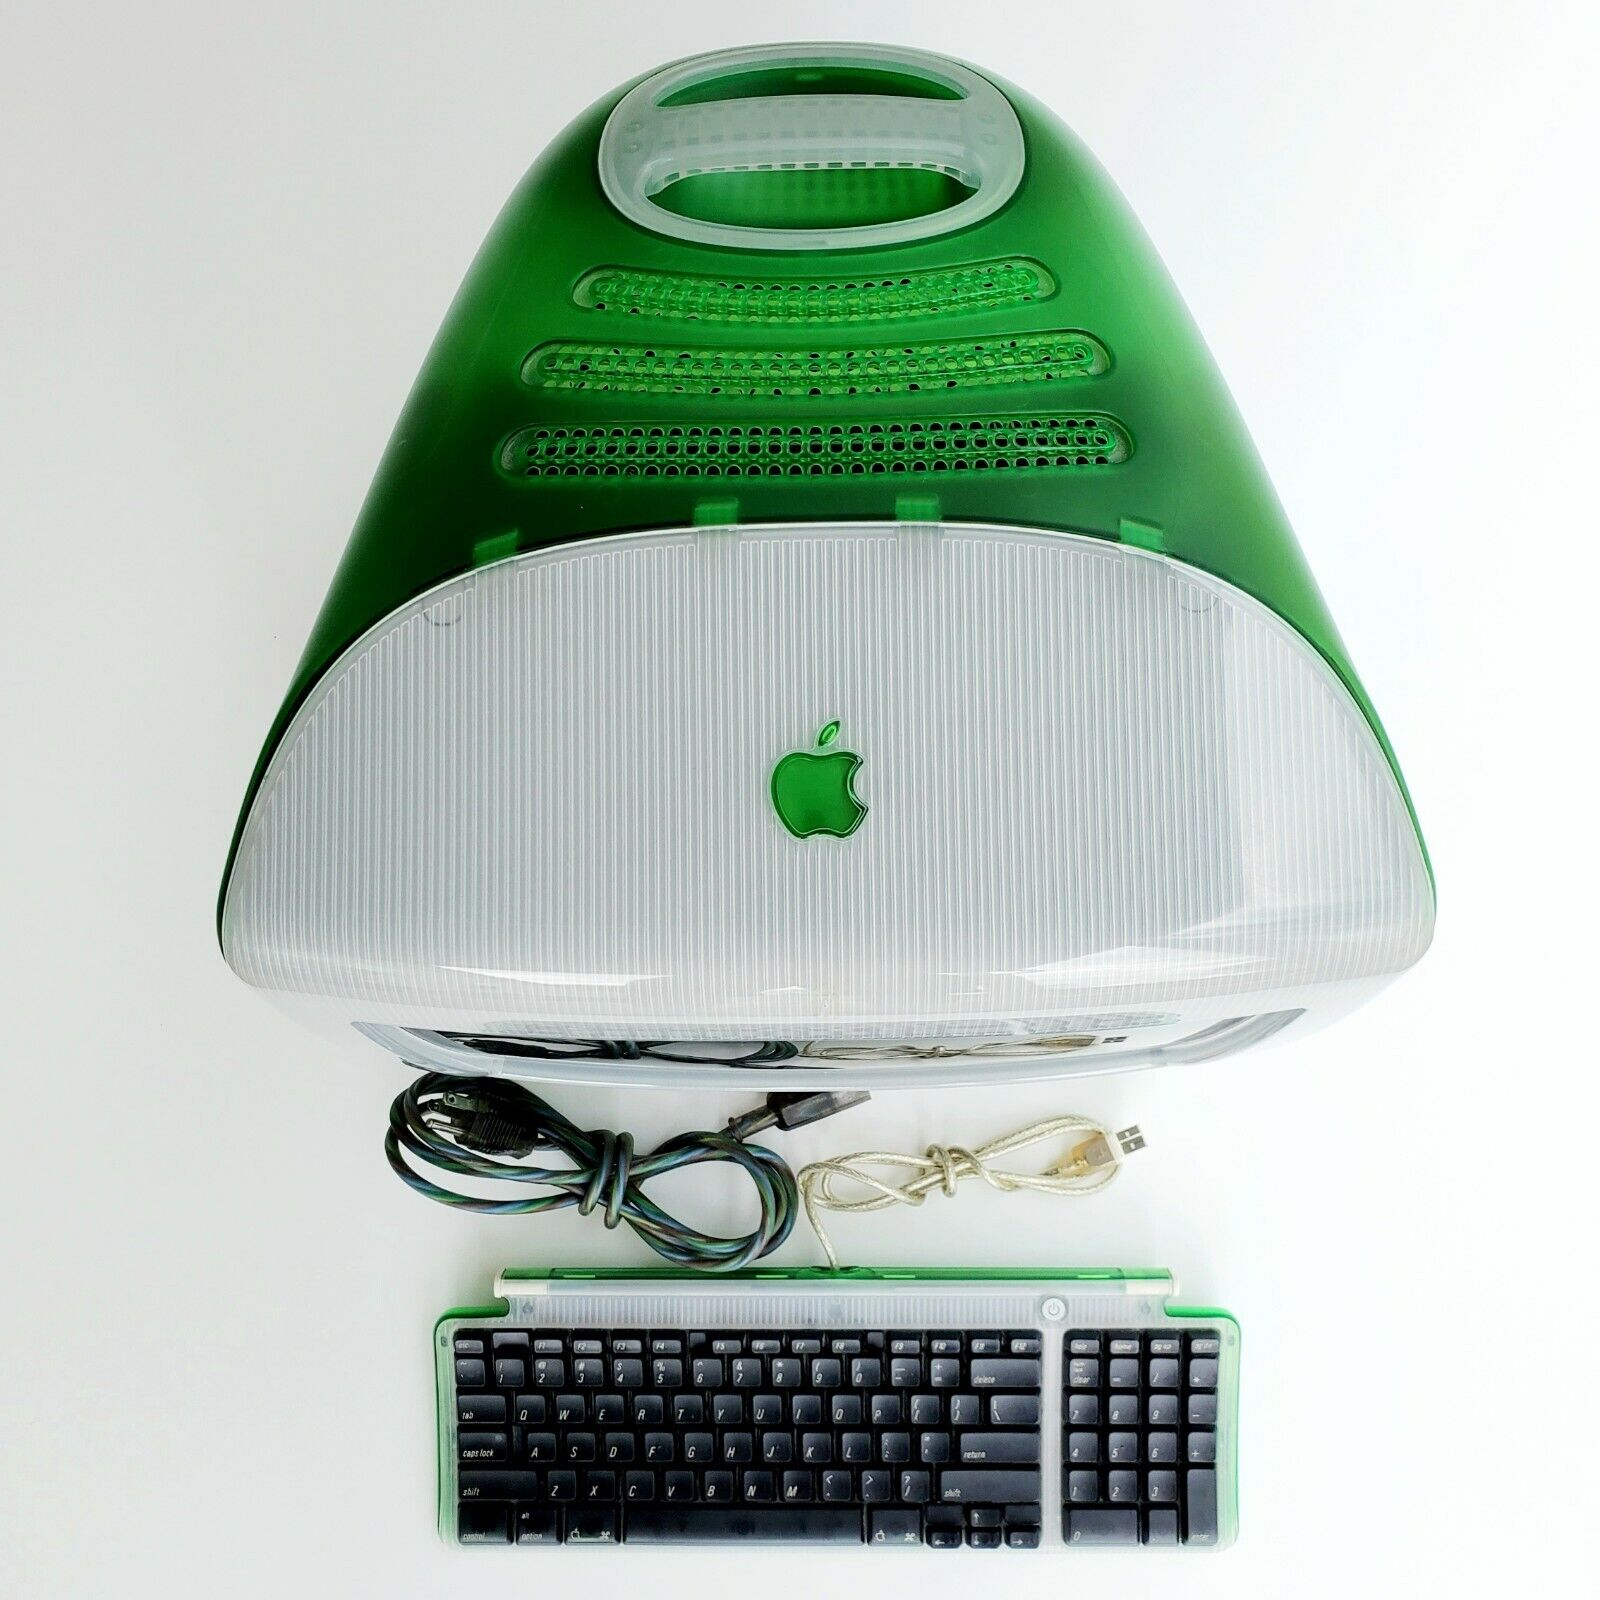 Apple iMac G3 333 Lime Green Mac O.S 8.6 Vintage Powers Up - Does Not Fully Load